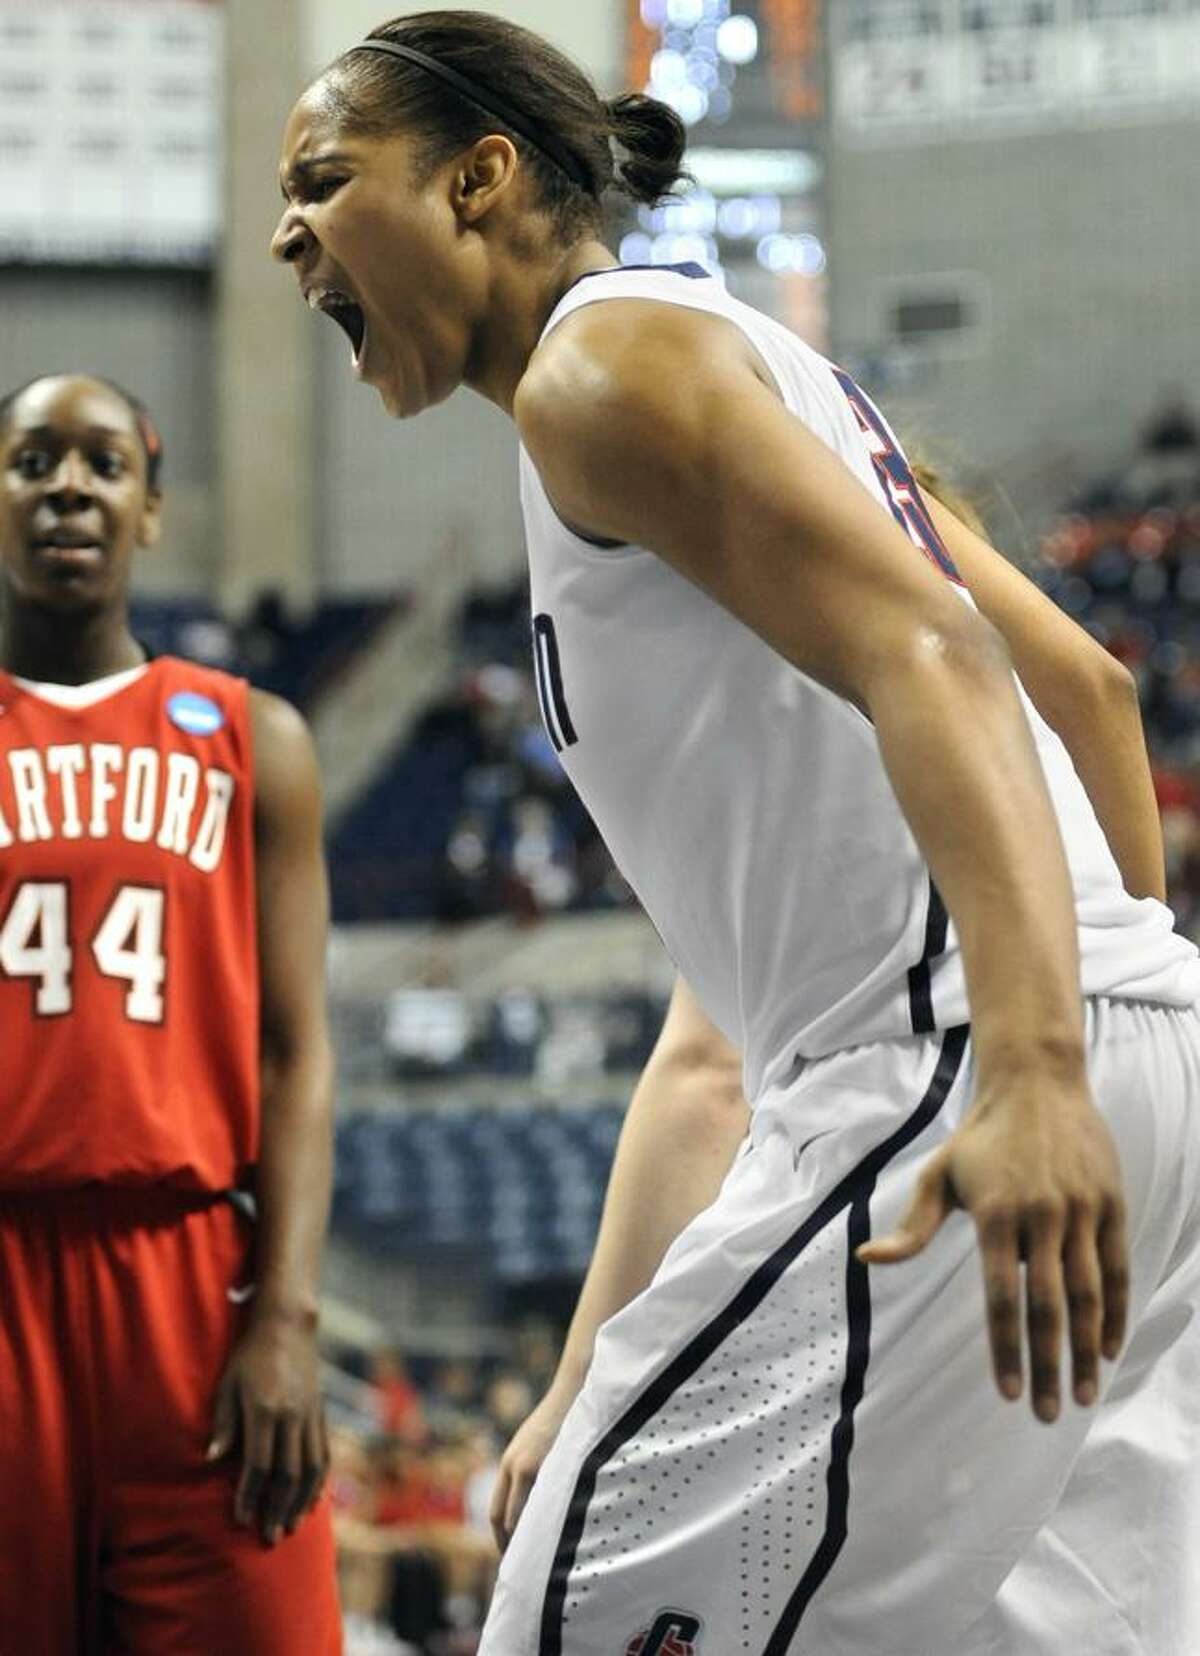 Connecticut's Maya Moore reacts after teammate Michala Johnson if fouled while making a basket against Hartford during the second half of an East regional first-round NCAA women's college tournament basketball game in Storrs, Conn., Sunday, March 20, 2011. (AP Photo/Jessica Hill)